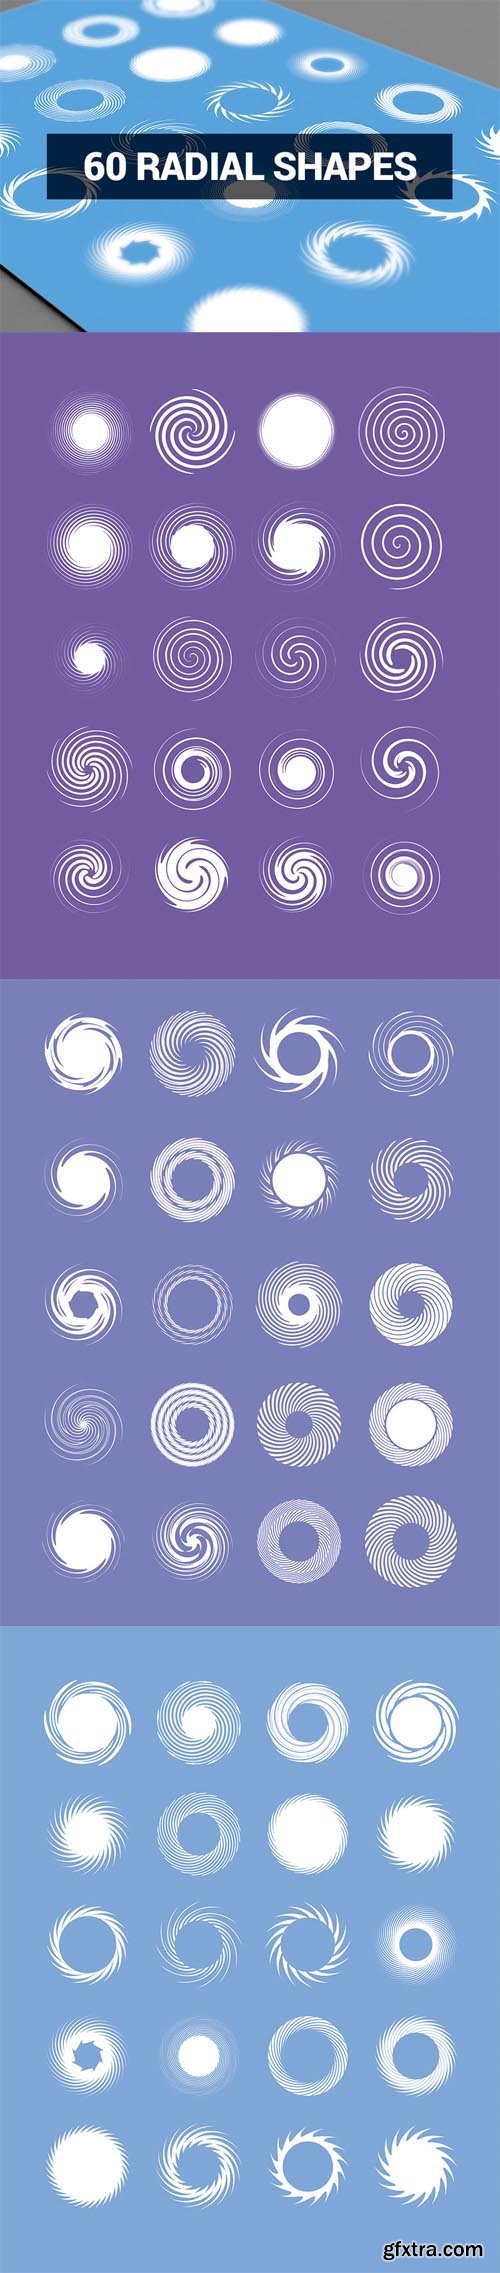 Abstract Shapes - 60 Radial Shapes